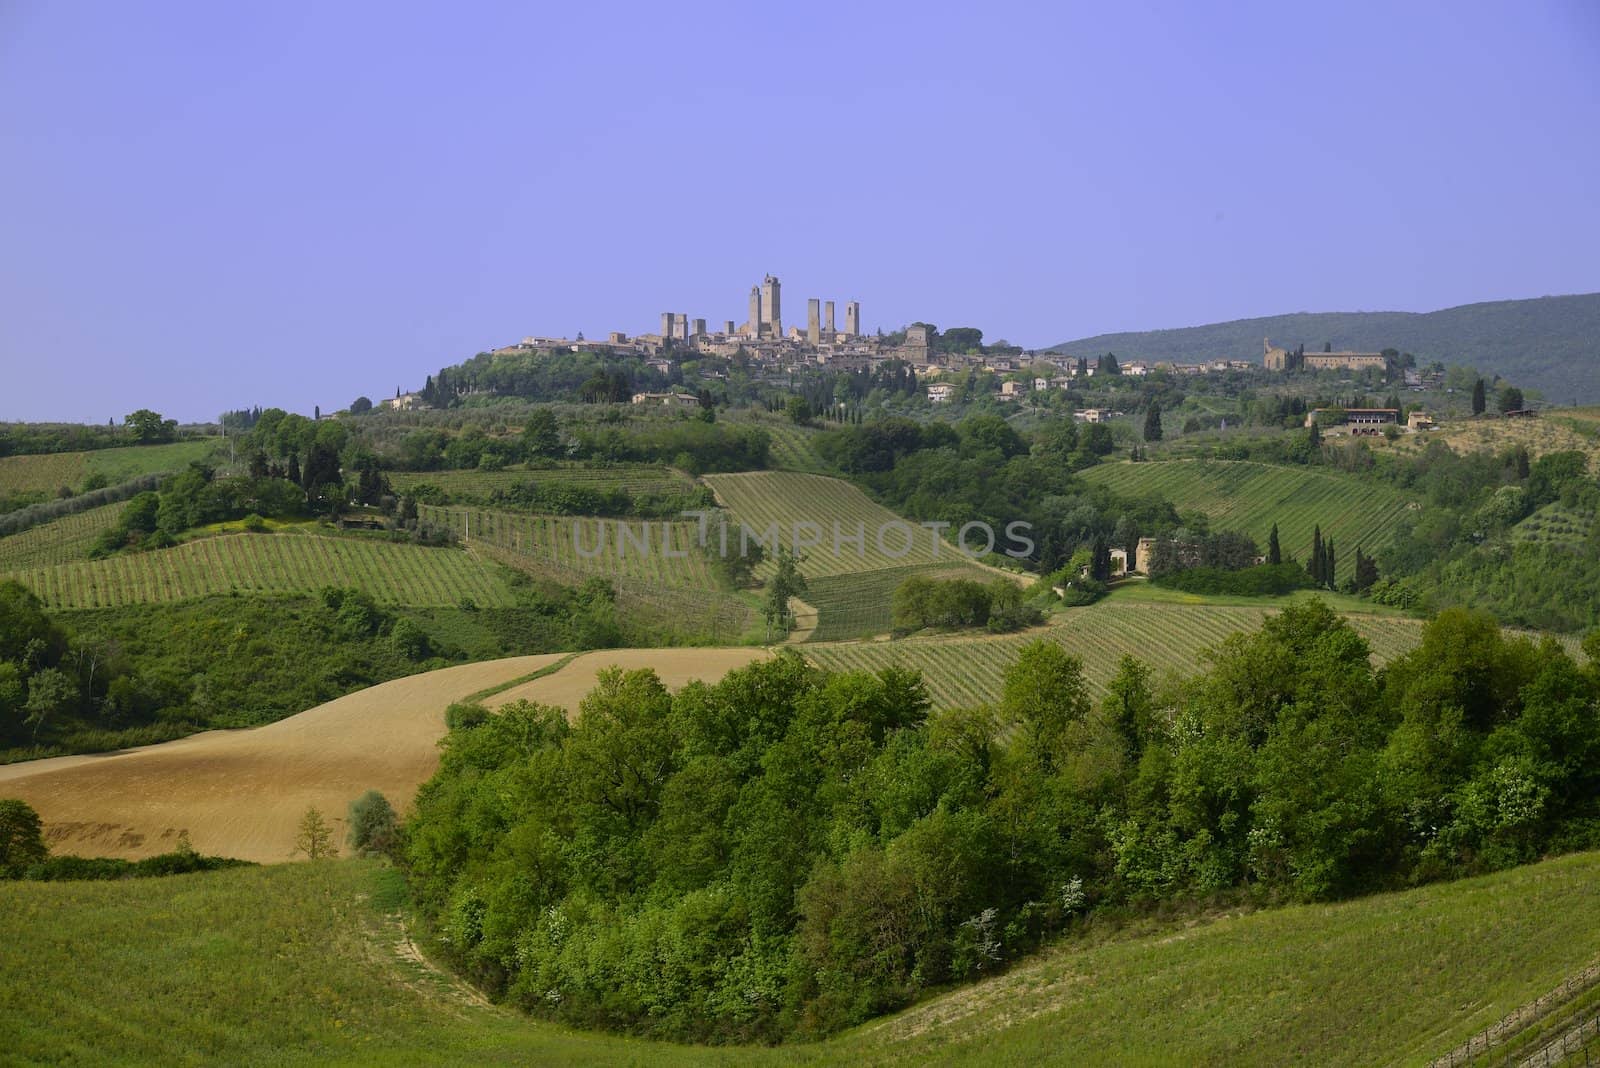 The beautiful village of San Gimignano in the hearth of Tuscany